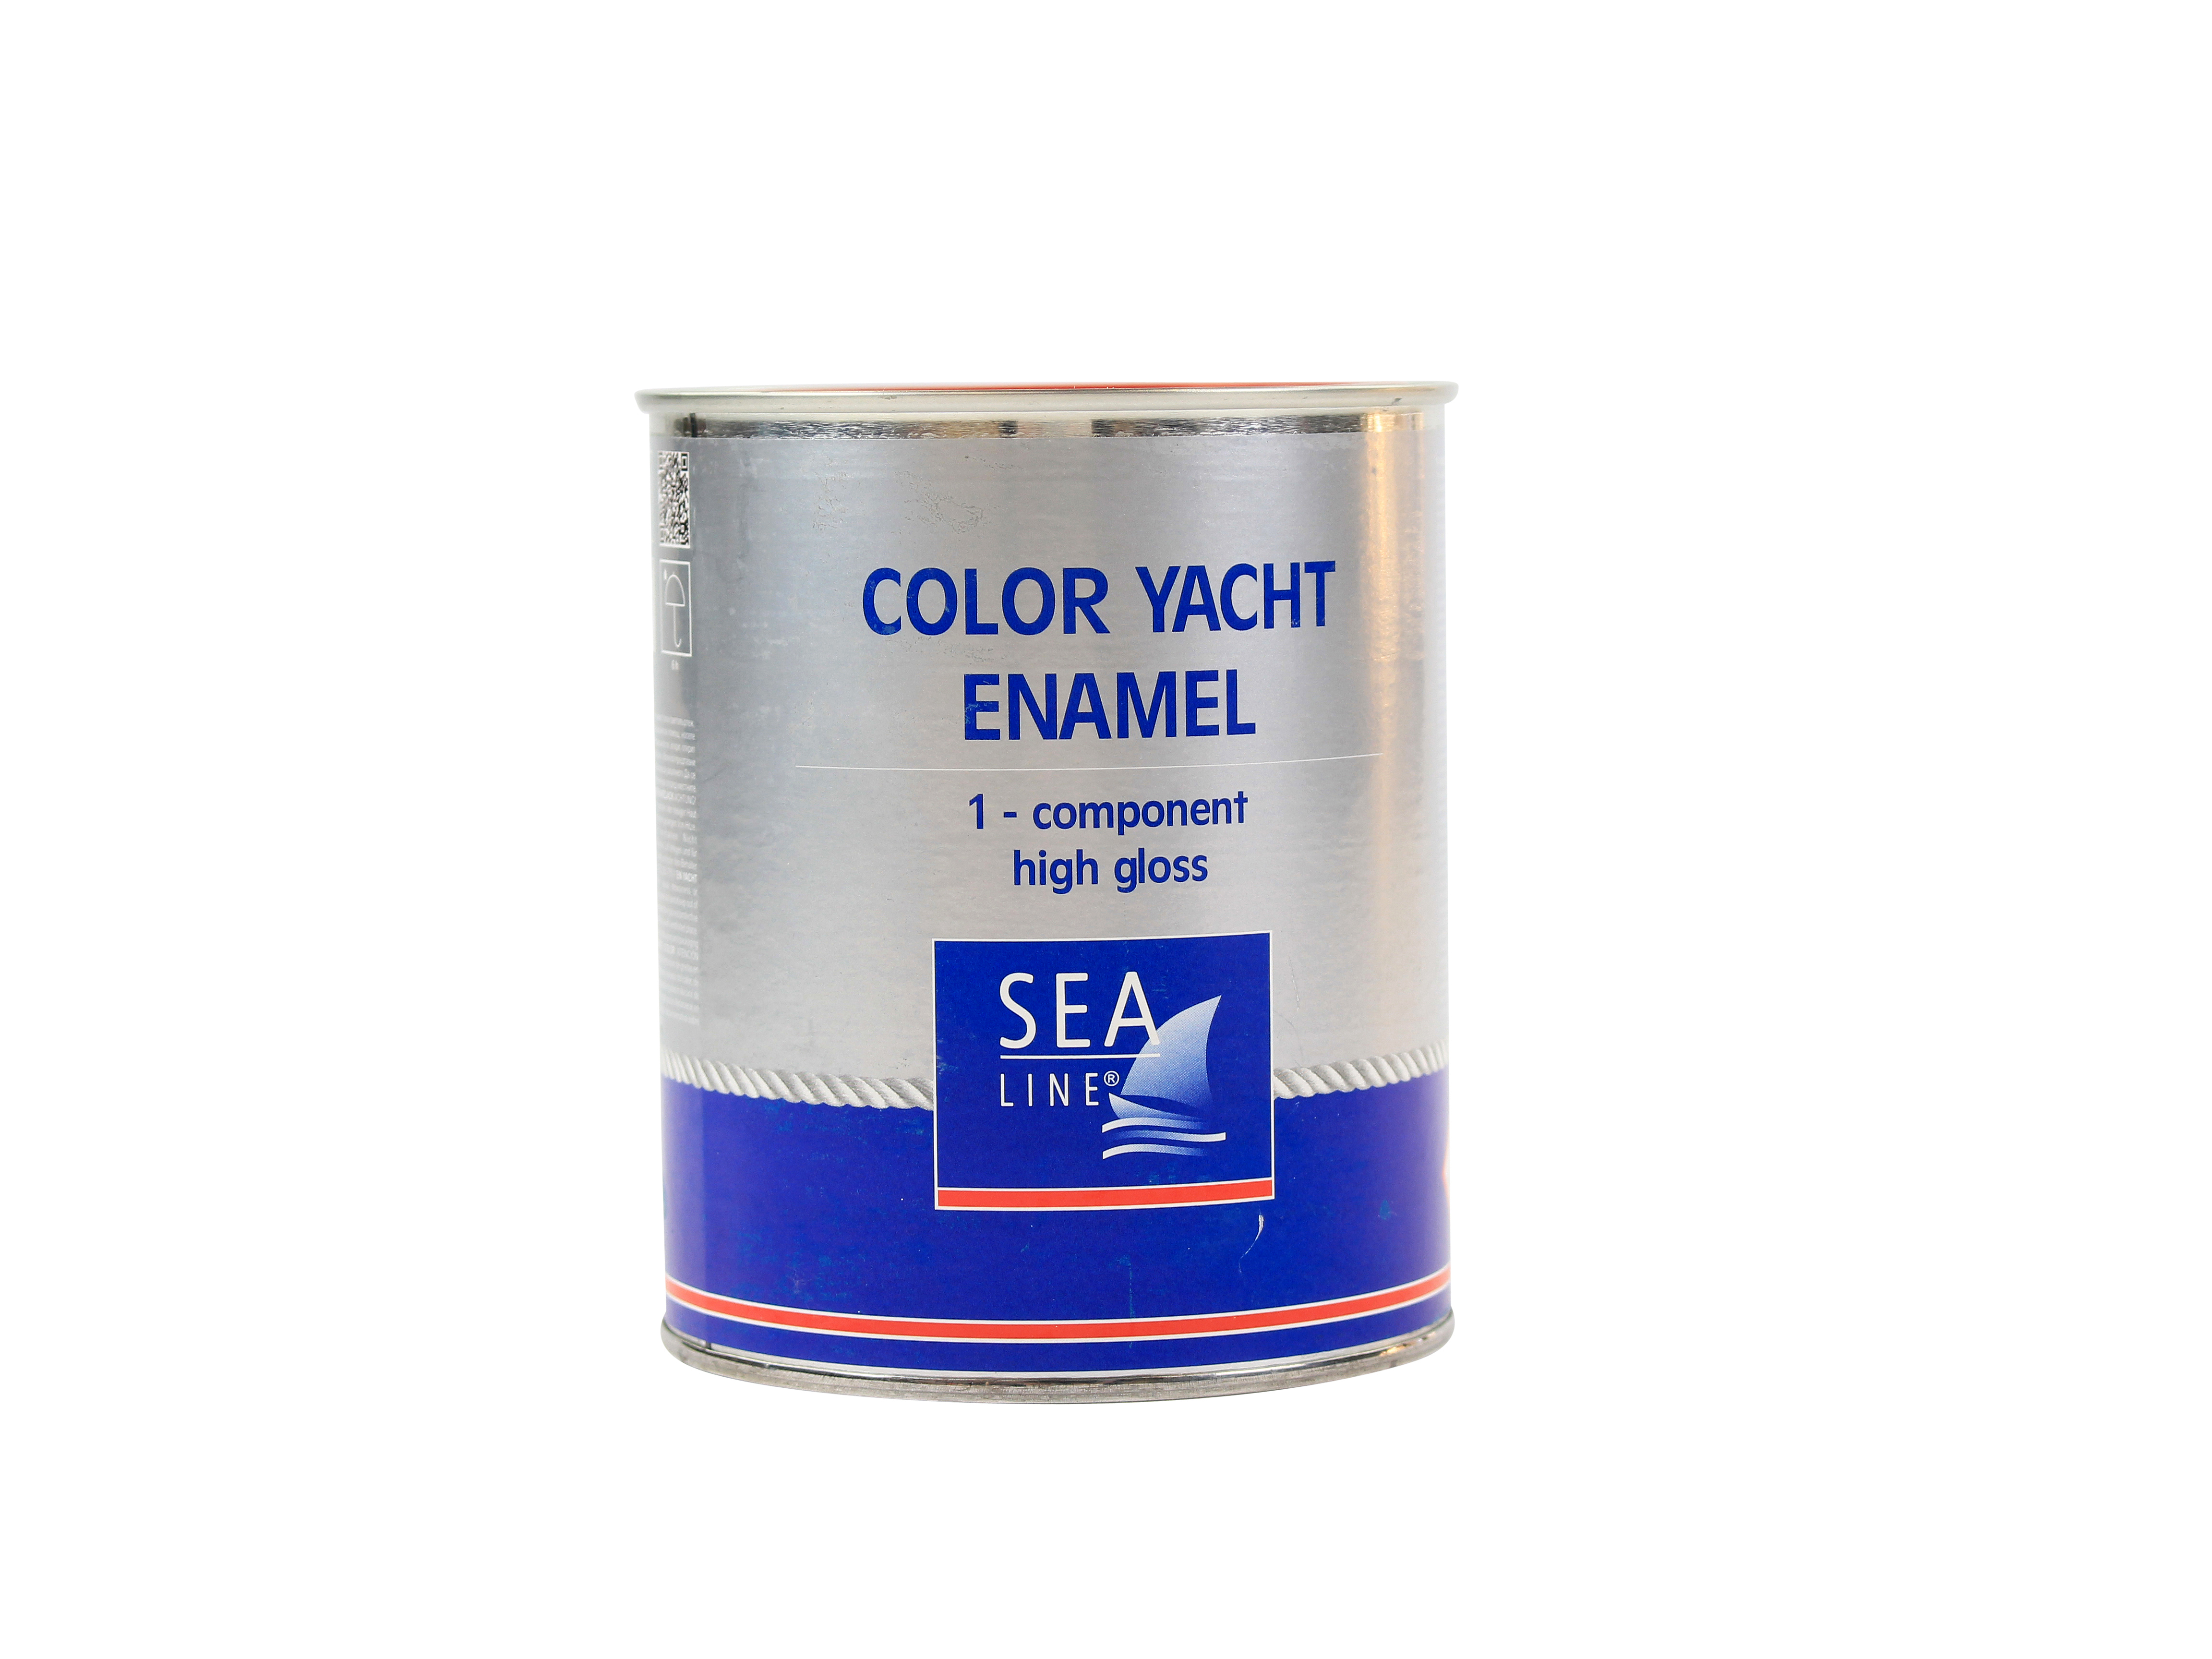 Durable enamel lacquer paint for wood, glass, plastic and metal - RAL 9005